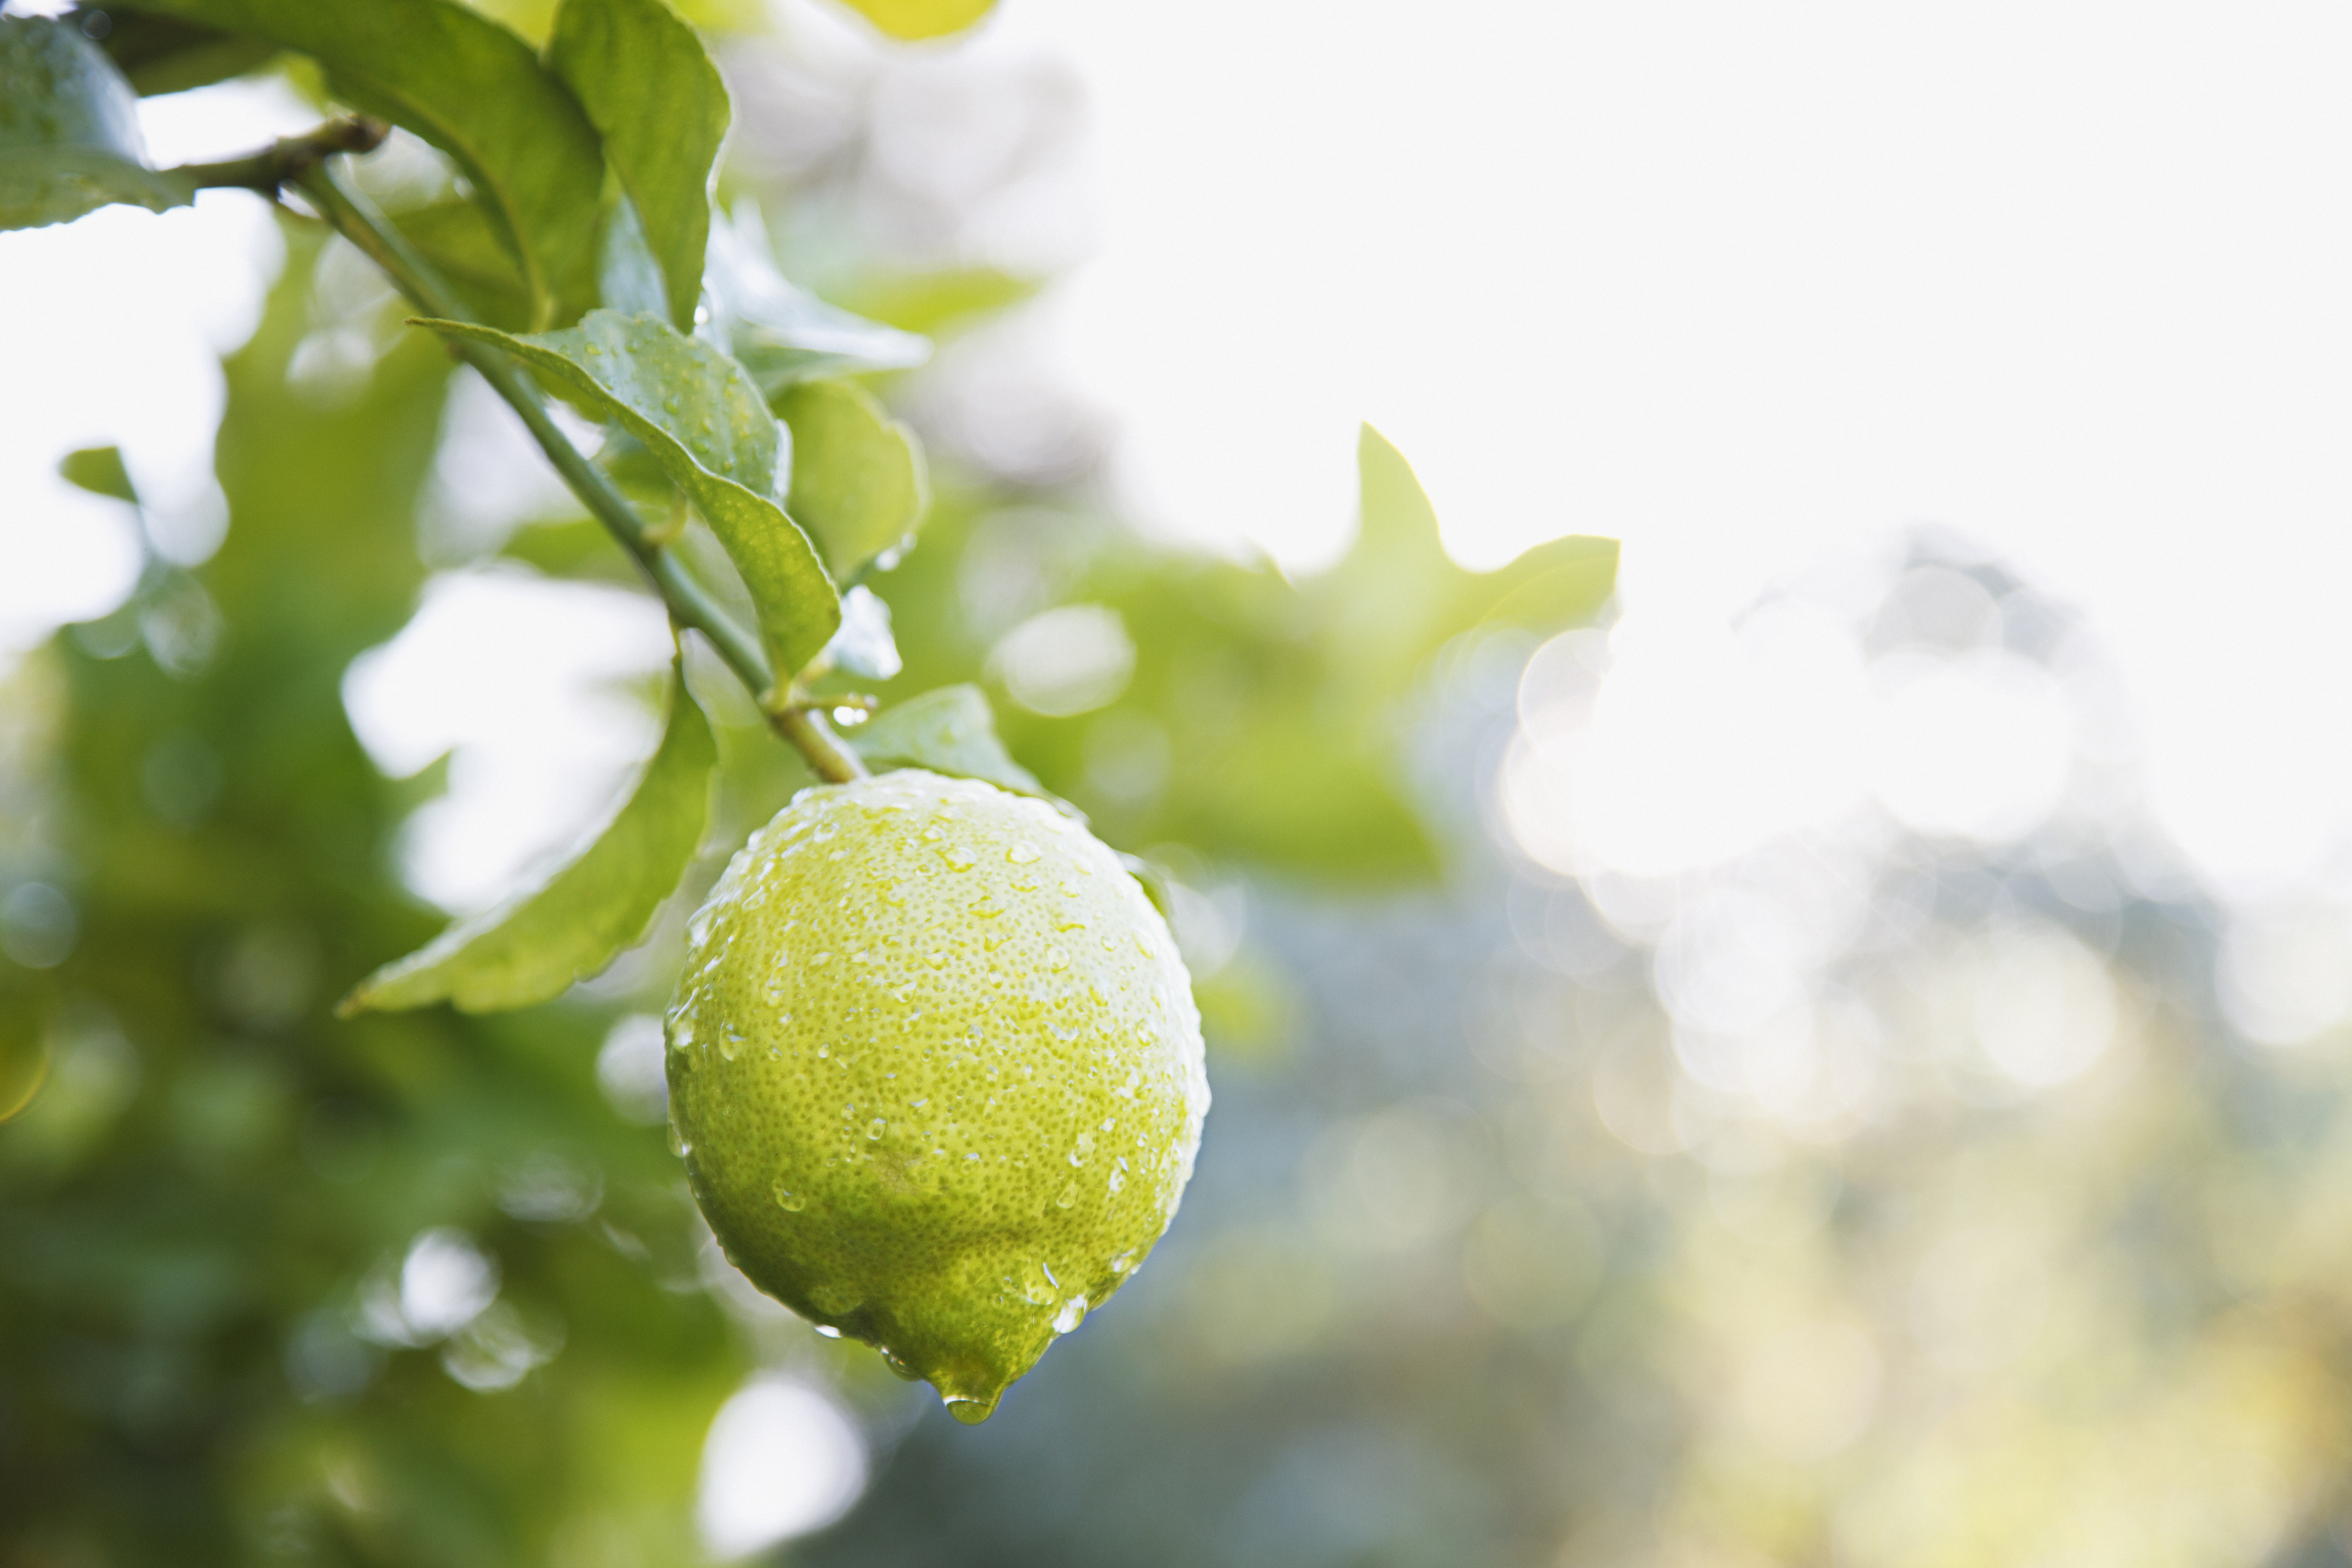 A lime on a branch. | Source: Getty Images